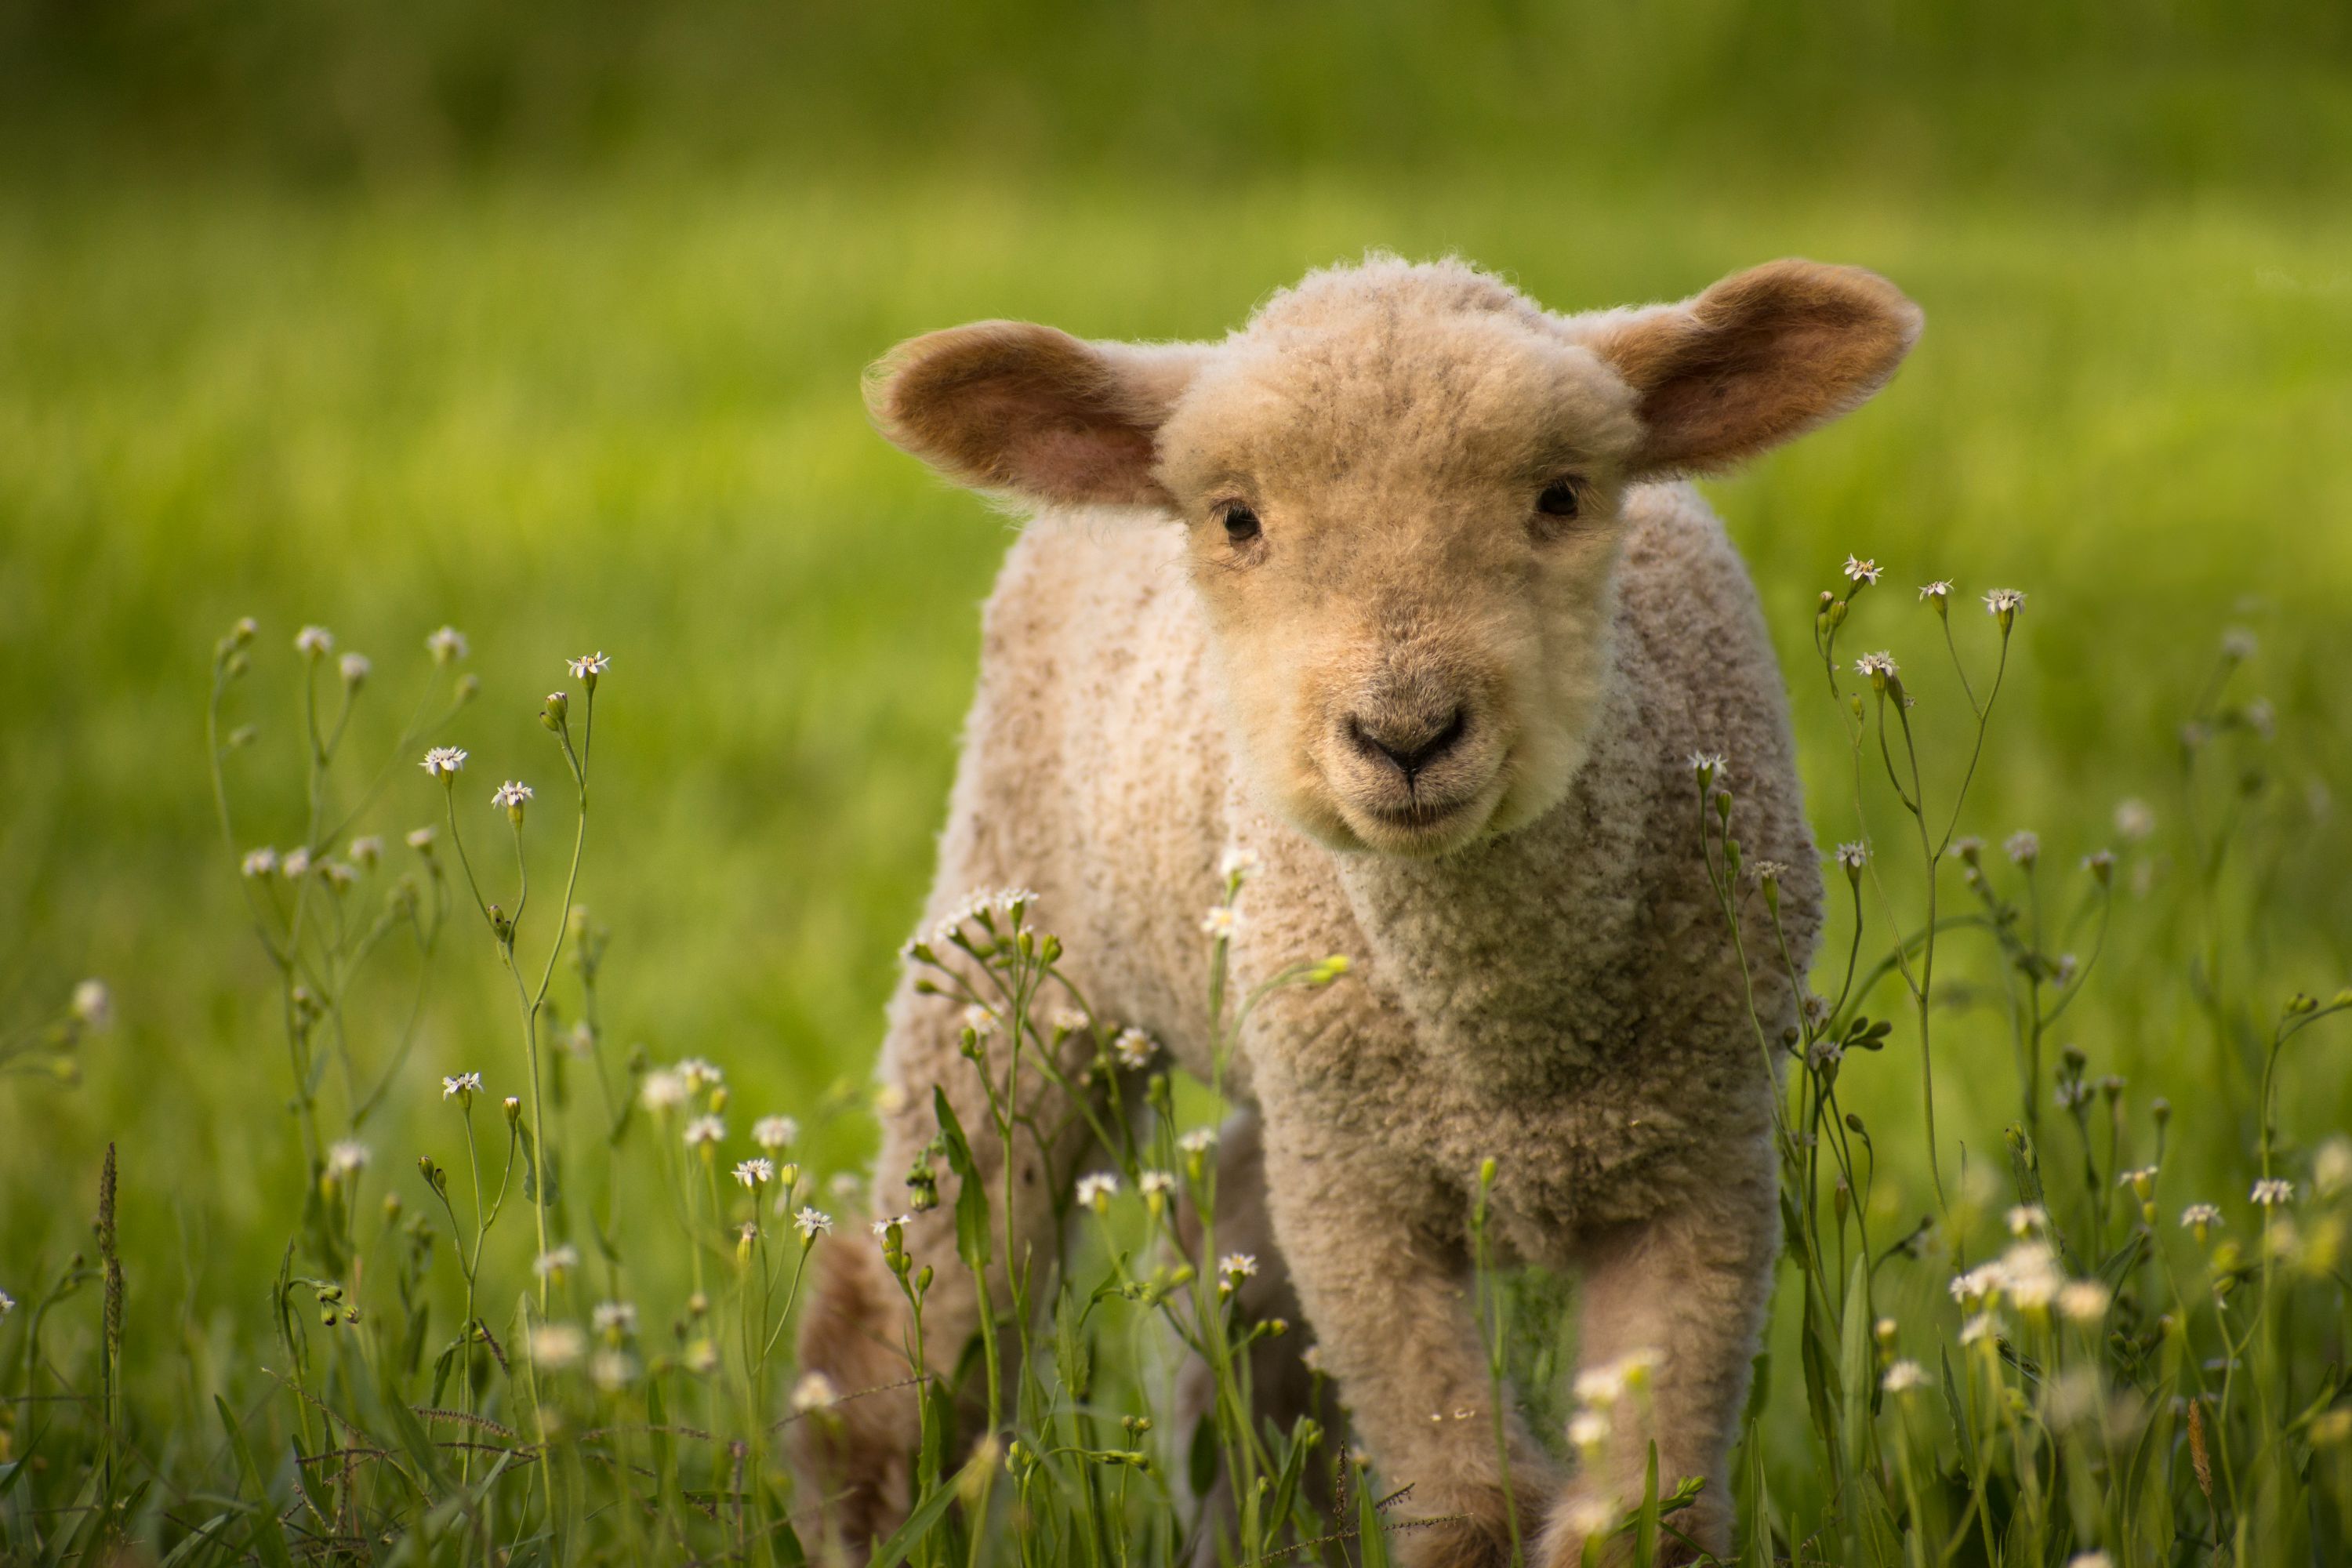 Little Sheep in the Meadow